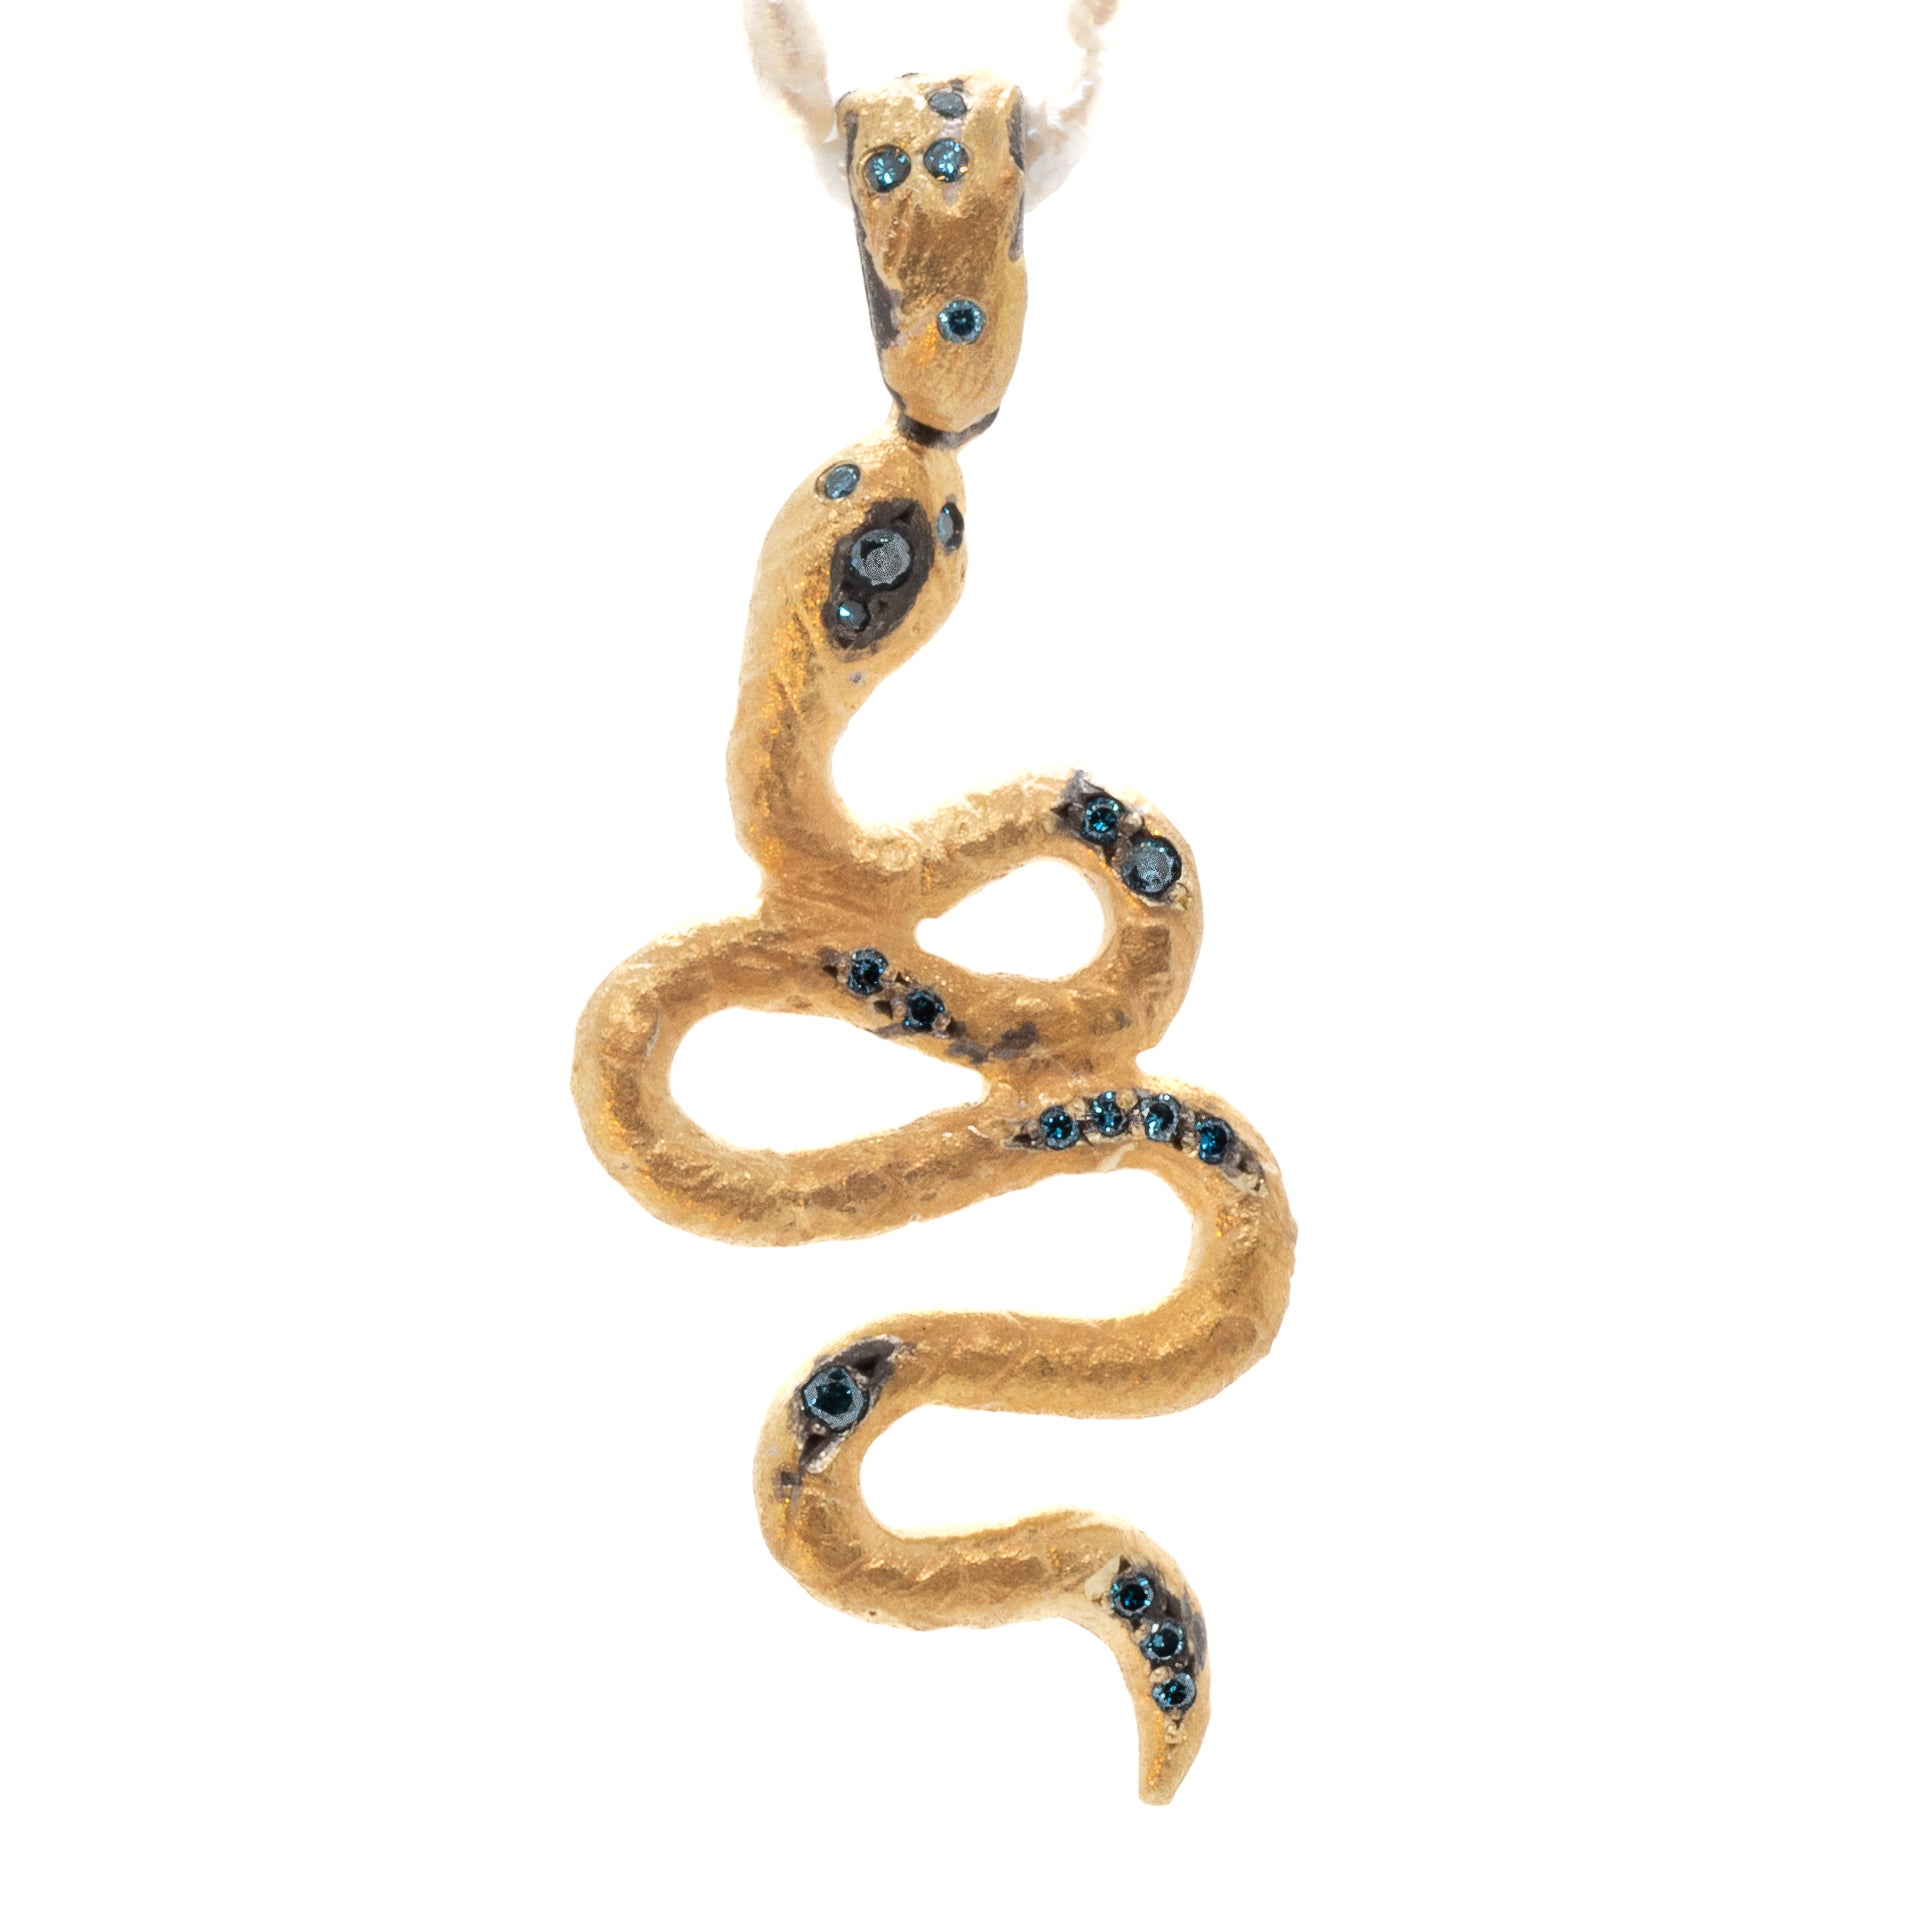 Nature Snake Necklace, a unique and captivating accessory that combines luxury and craftsmanship in its exquisite design.